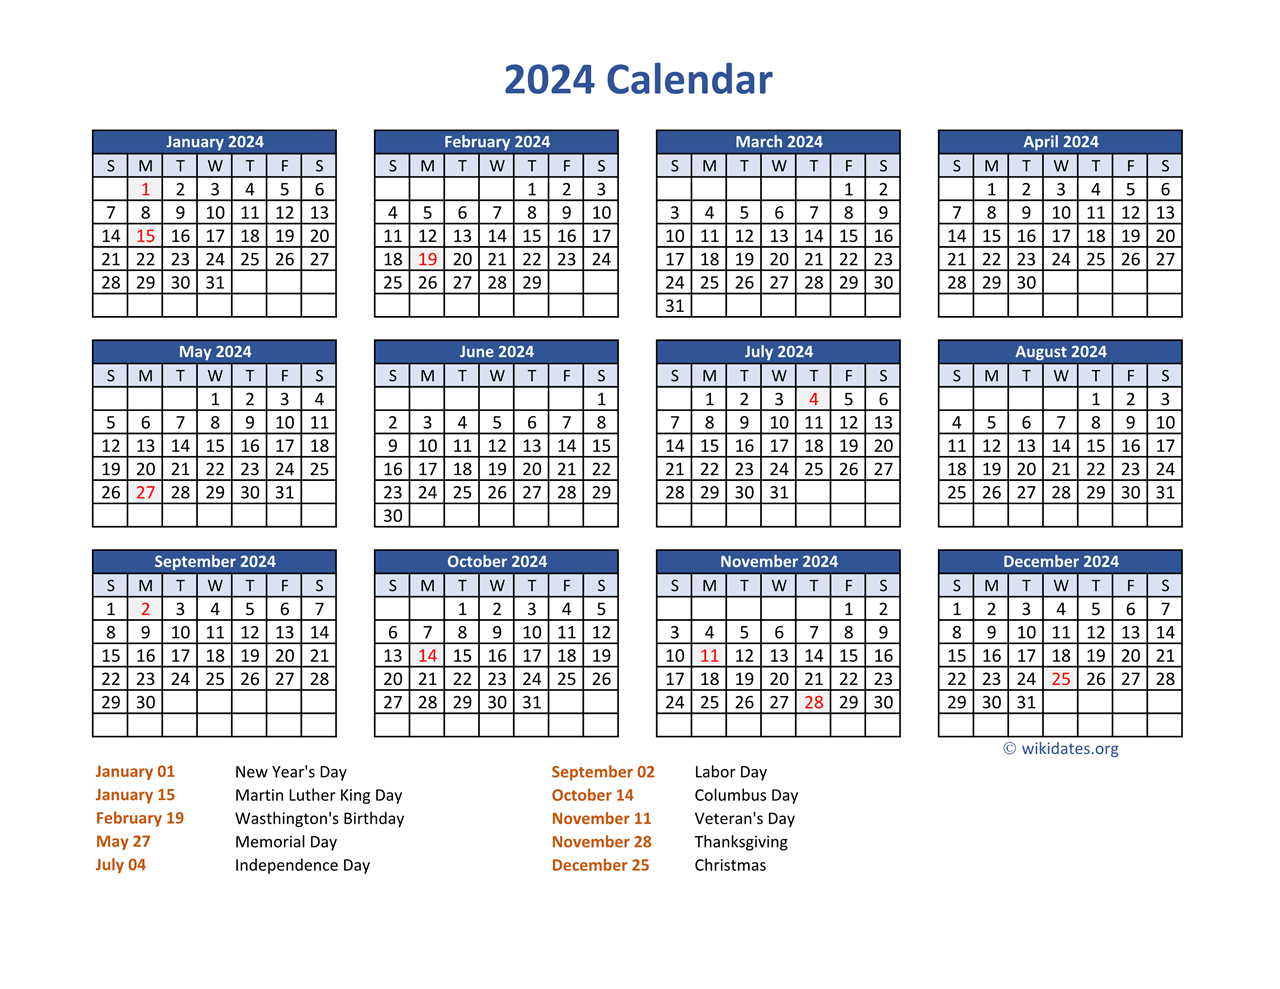 Pdf Calendar 2024 With Federal Holidays | Wikidates for 2024 Printable Calendar With Us Holidays